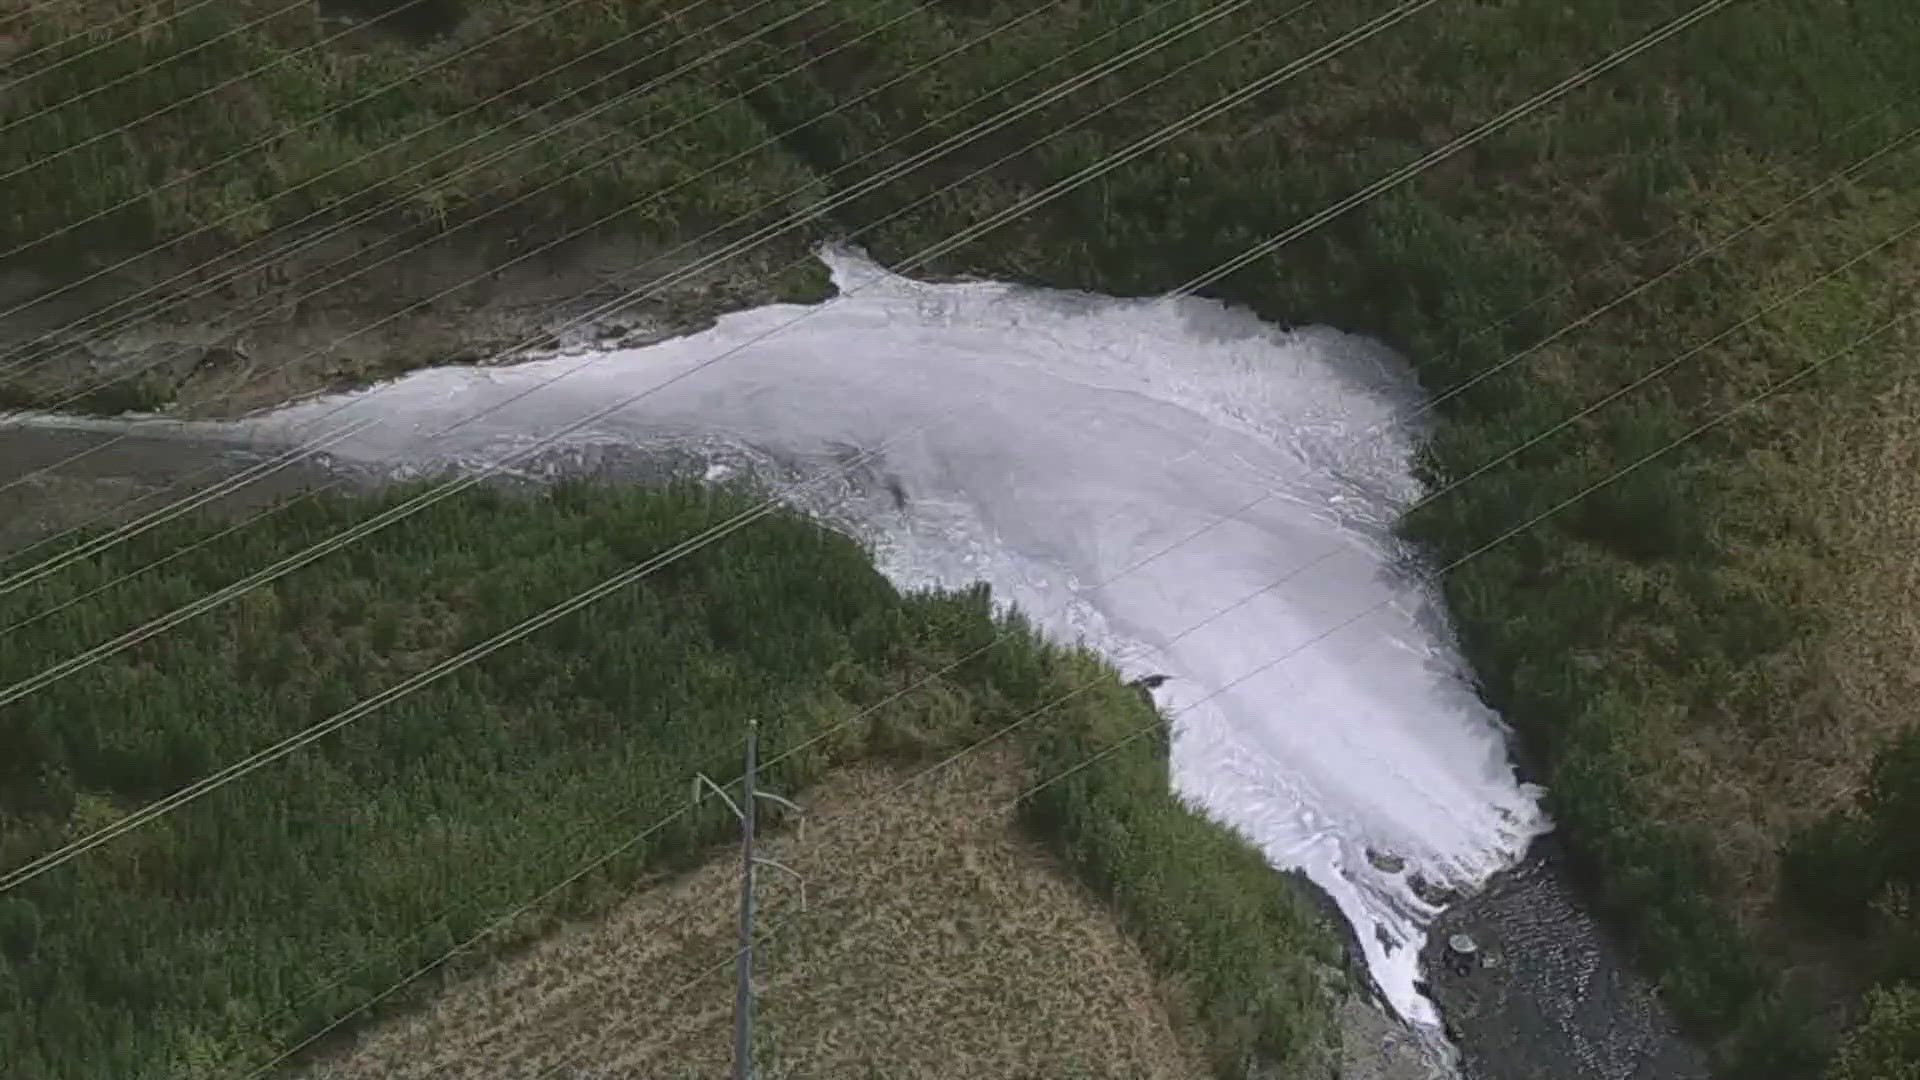 City officials say foam retardant used to suppress the fire spilled into storm drains and nearby creeks.